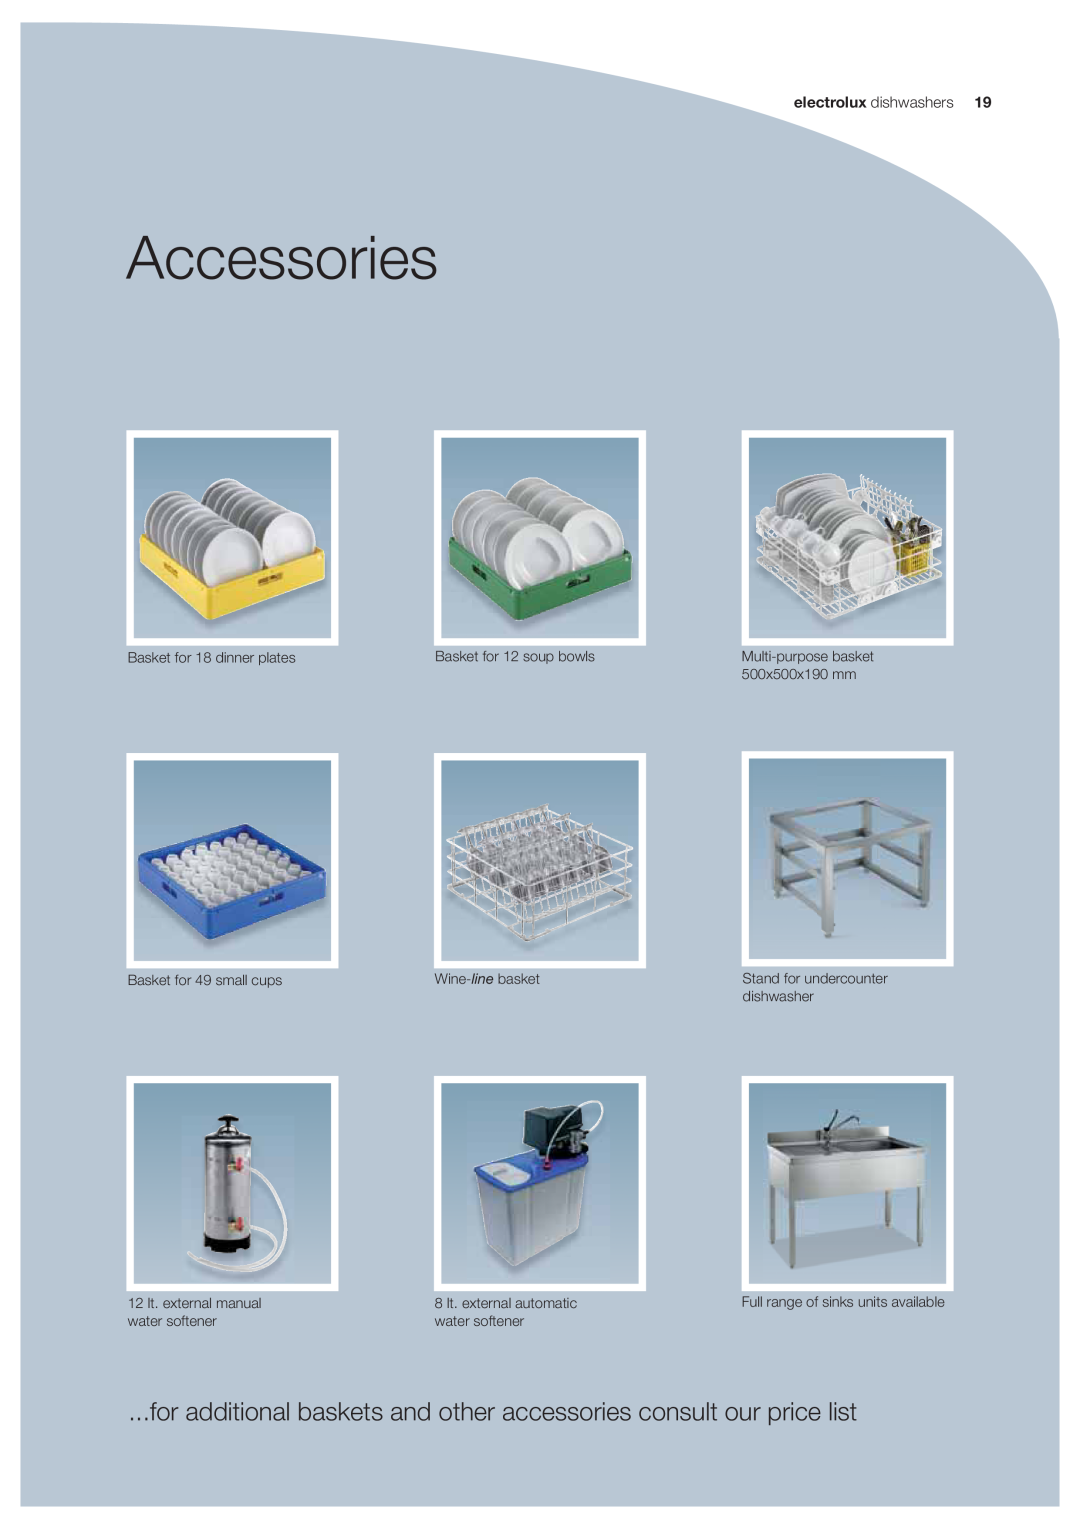 Electrolux EUCAI Accessories, for additional baskets and other accessories consult our price list, electrolux dishwashers 